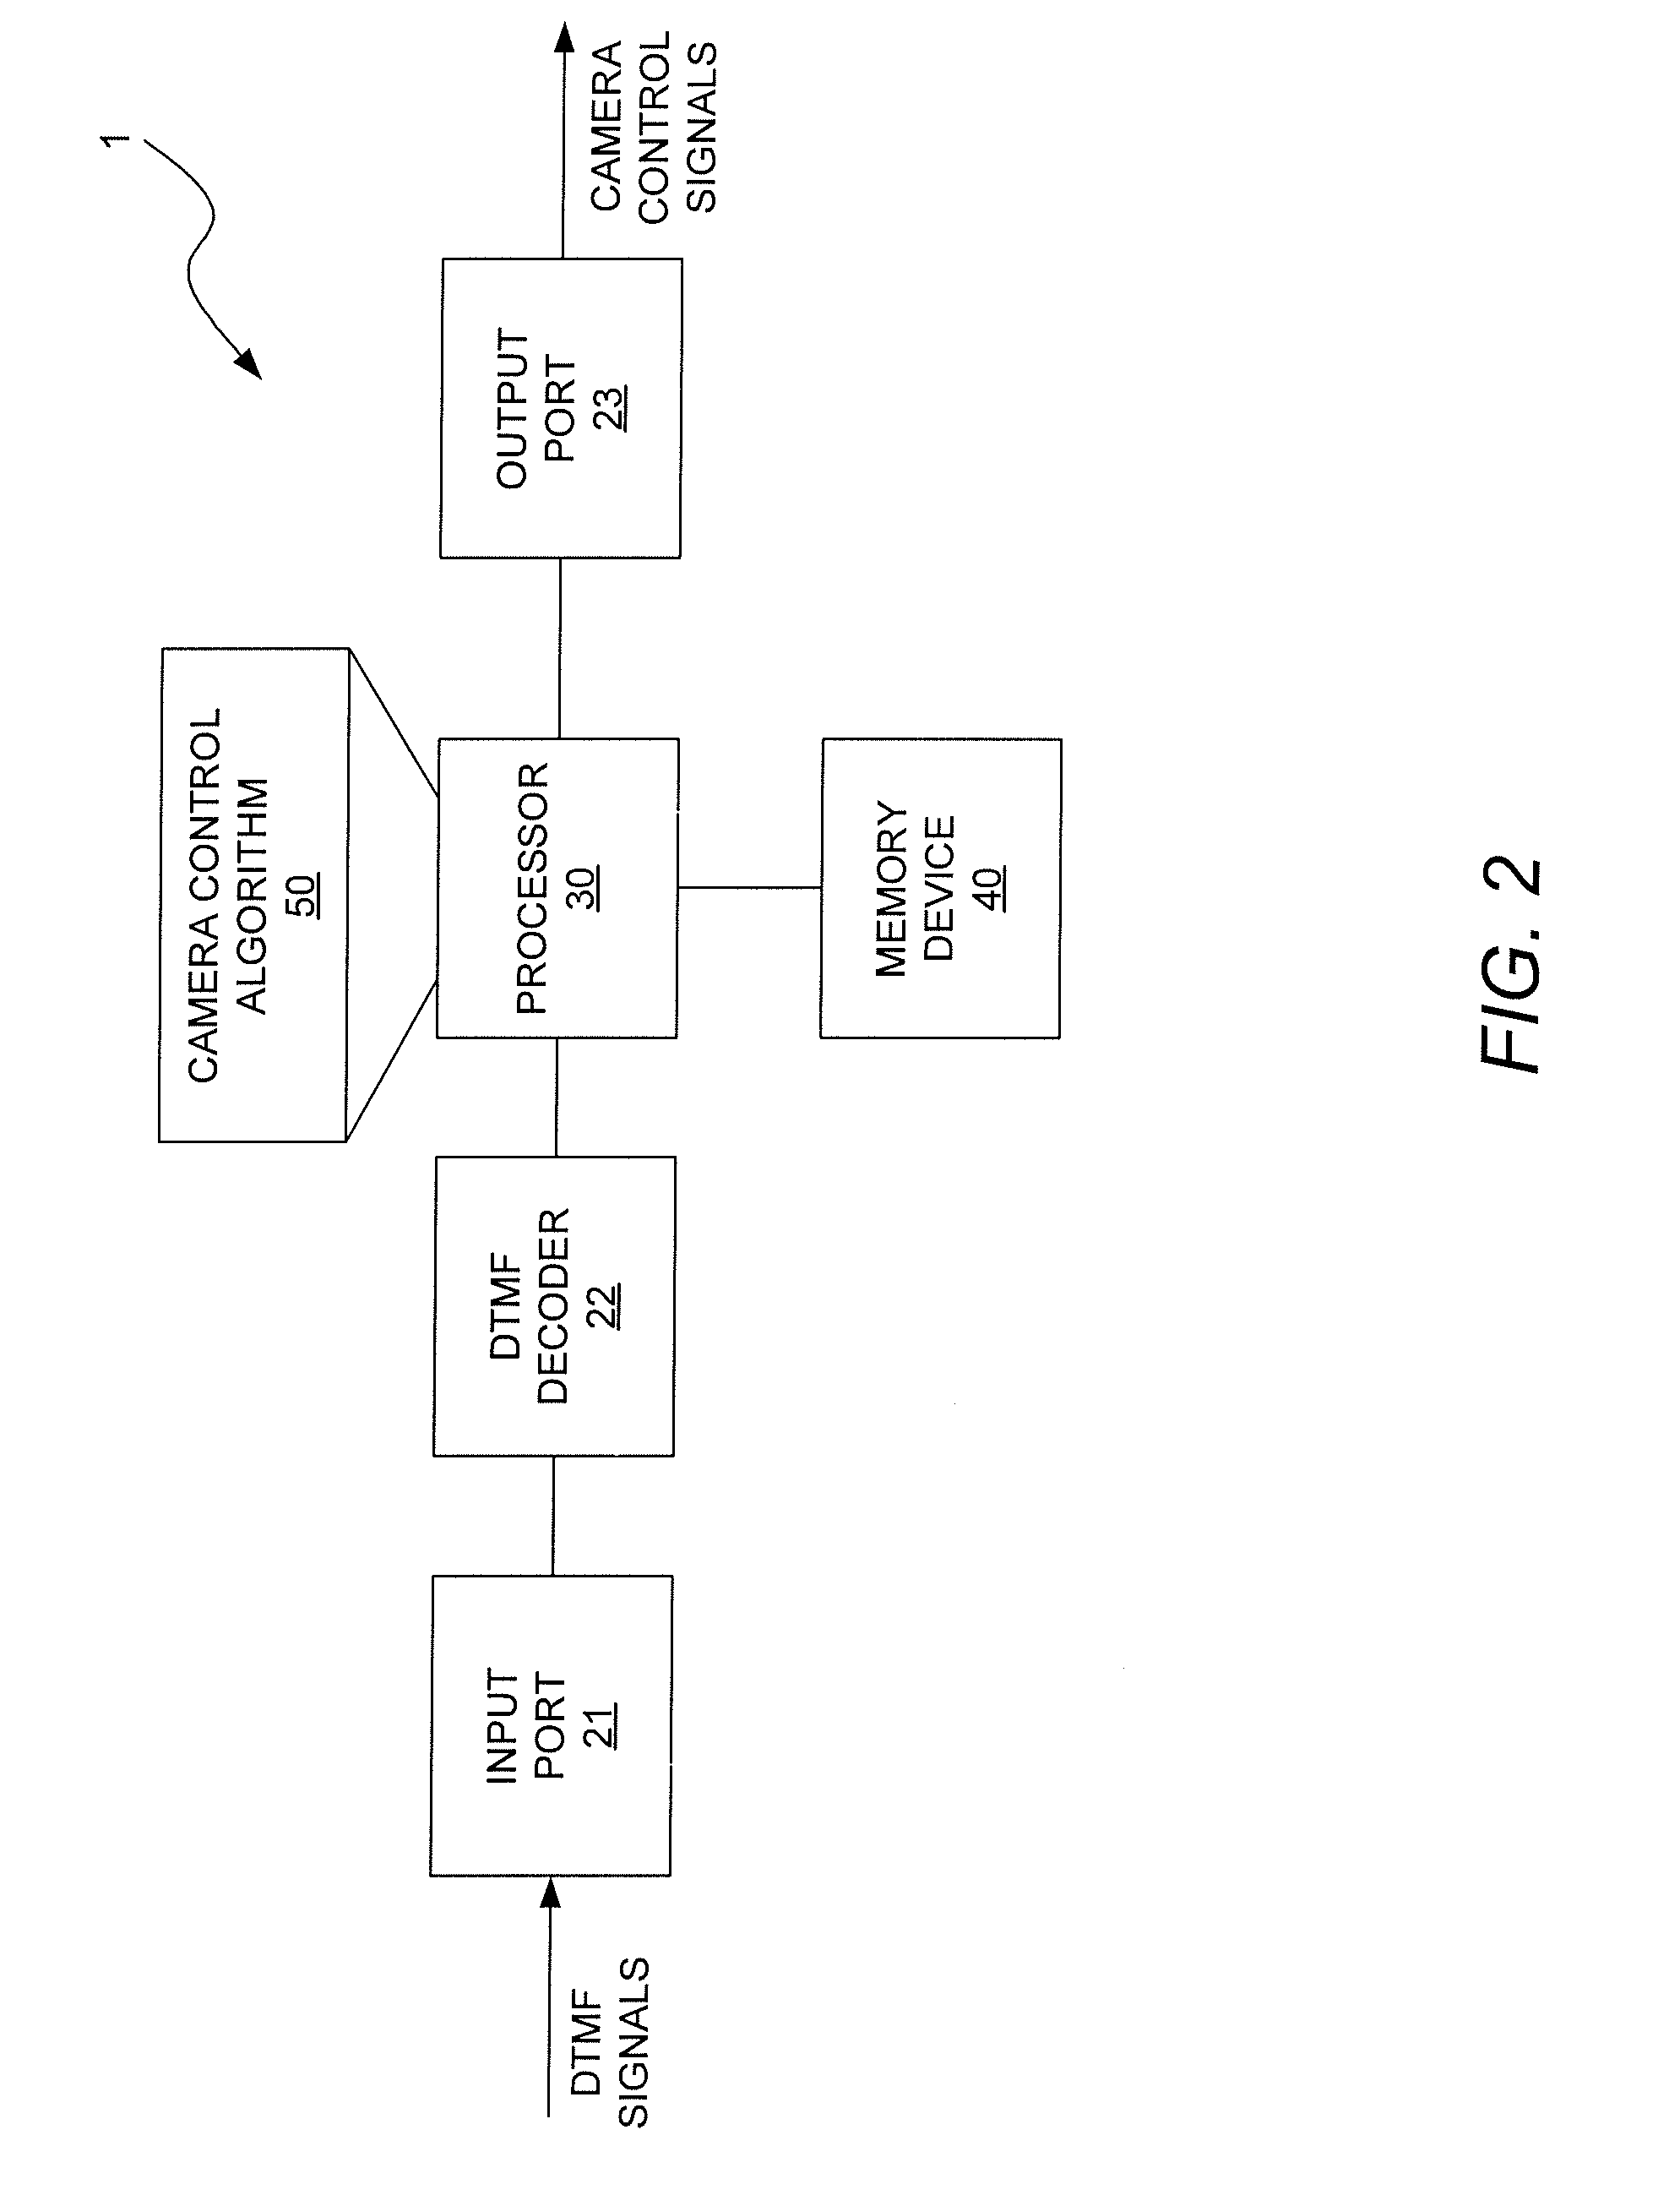 Mediation Device and Method for Remotely Controlling a Camera of a Security System Using Dual-Tone Multi-Frequency (DTMF) Signals